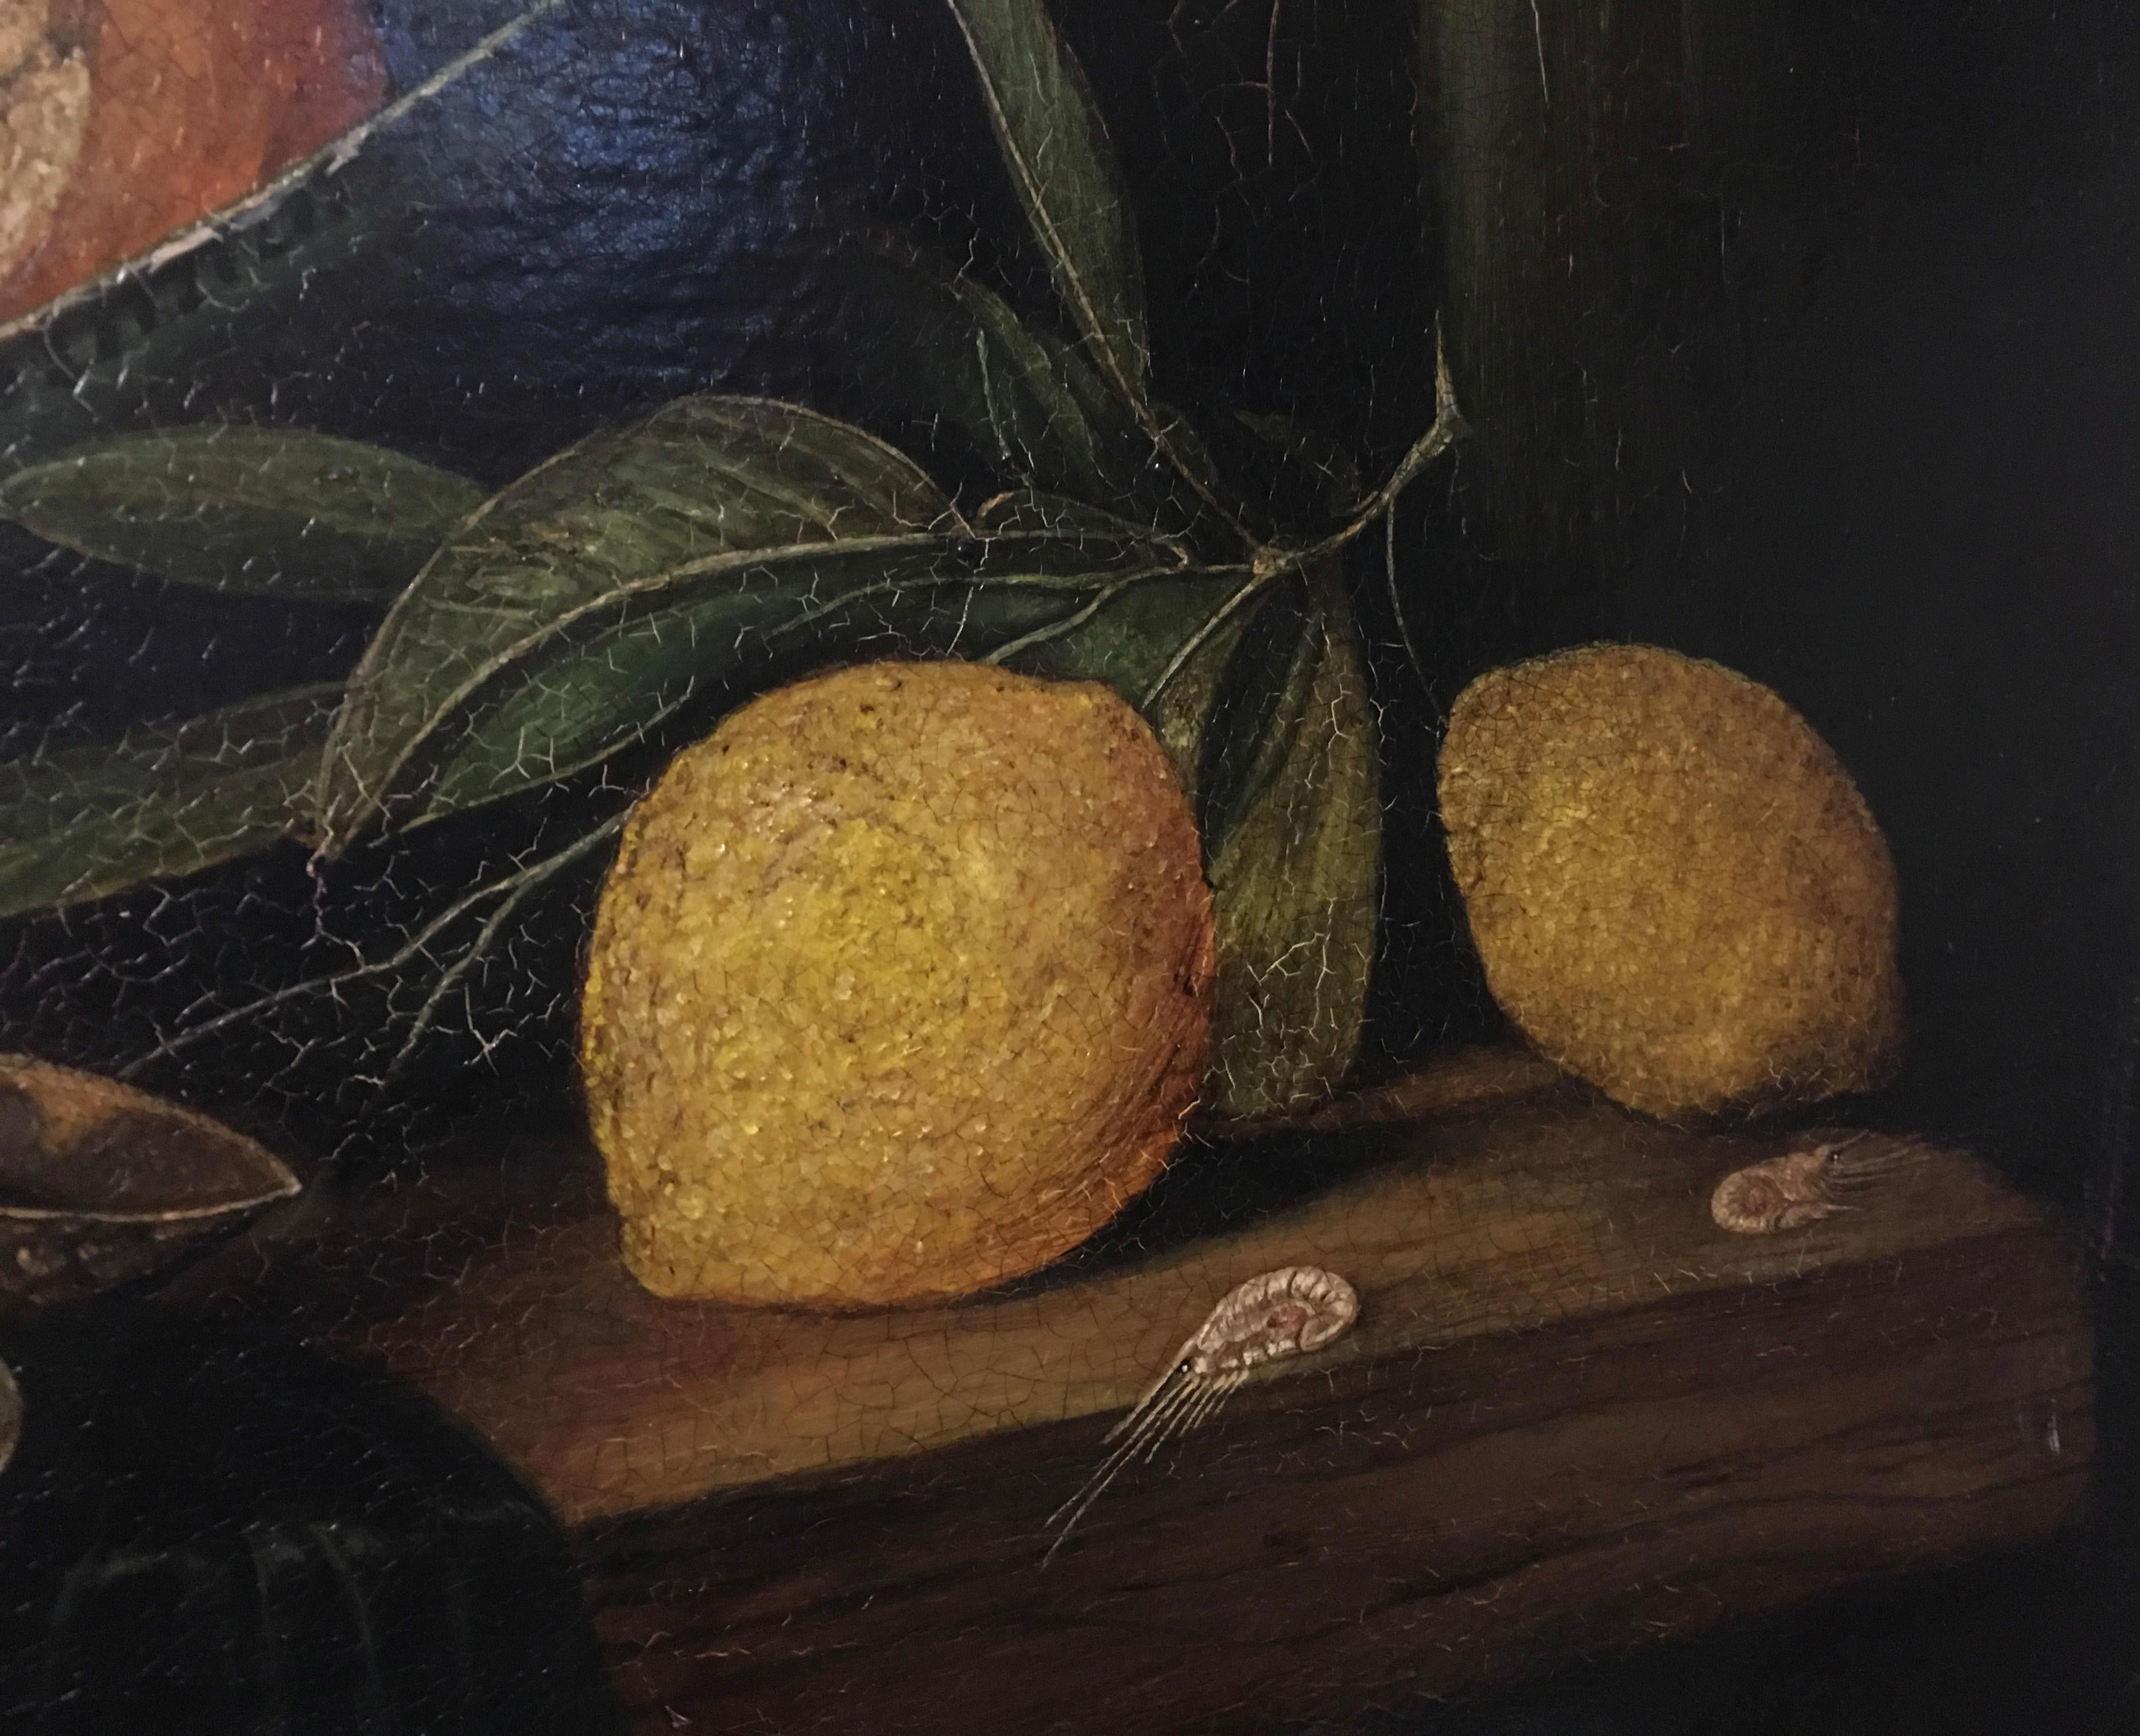 Still life - Giovanni Perna Italia 2006 - Oil on canvas cm.60x80

In this beautiful oil on canvas Giovanni Perna was inspired by the paintings of the Spanish painter of Dutch origin Juan van der Hamen, famous for his production of still lifes In